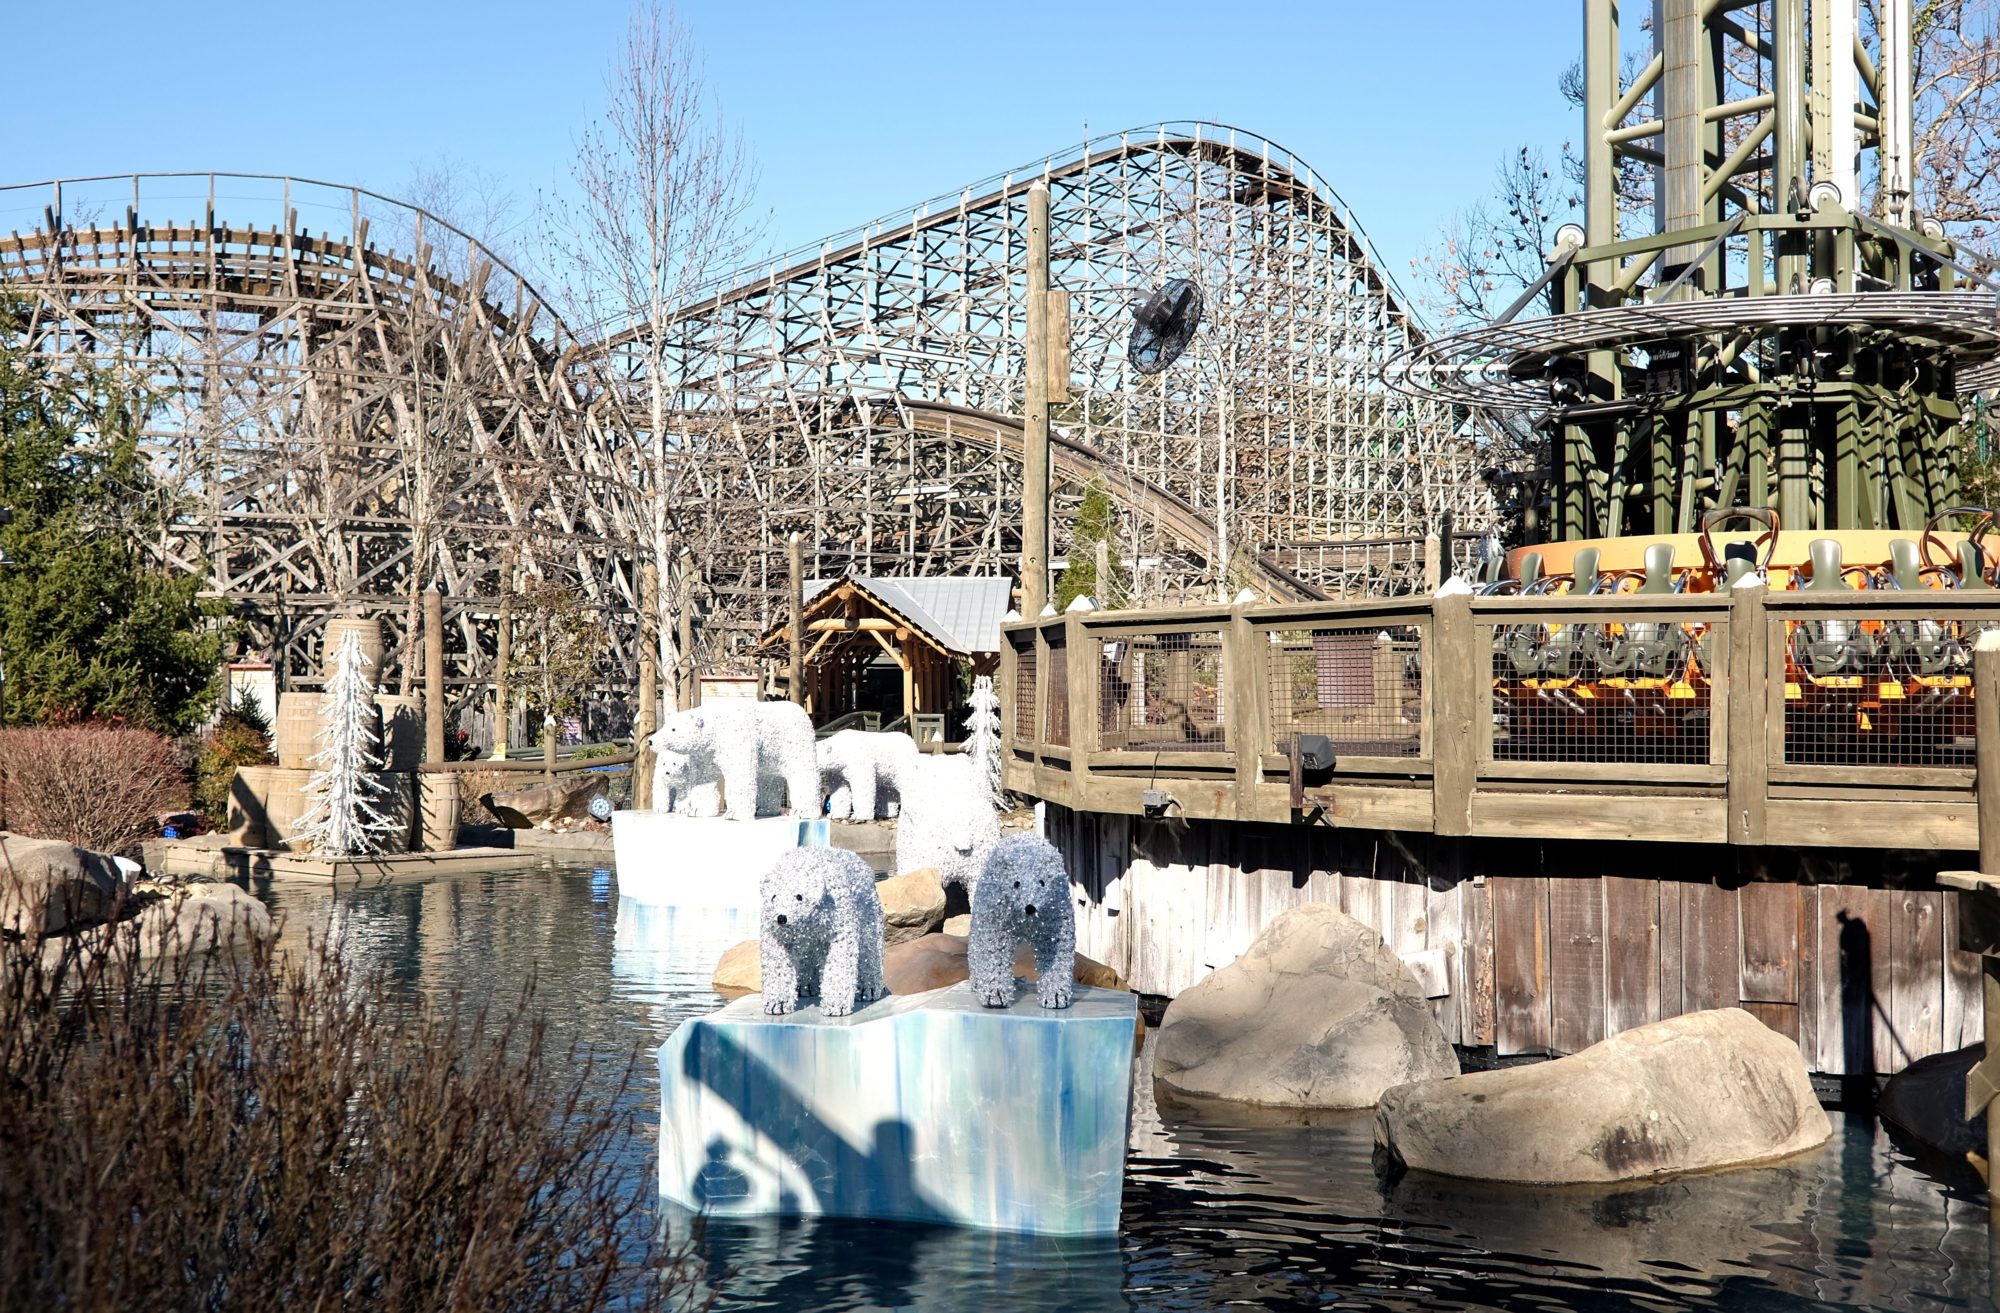 A rollercoaster in the background with floating polar bear sculptures on "ice"